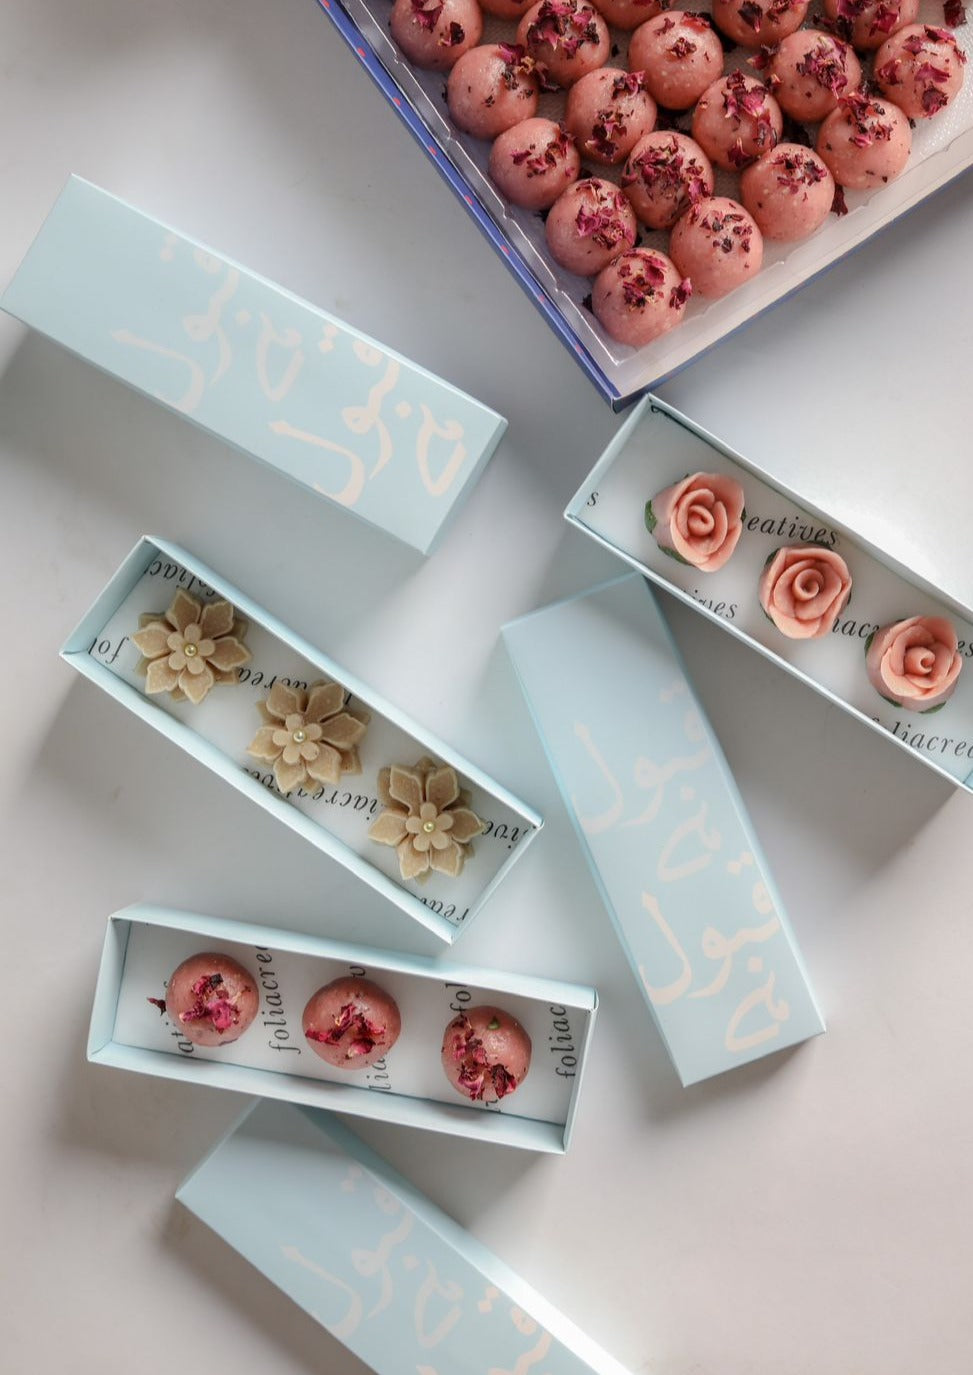 Announce your wedding is the sweetest way with our blue Qubool Hai boxes. Ideal as Nikkah giveaways and/or can be sent out with wedding invitations too. Pick the ribbon of your choice (Cream or Pink) and send these beautiful favors to your guests